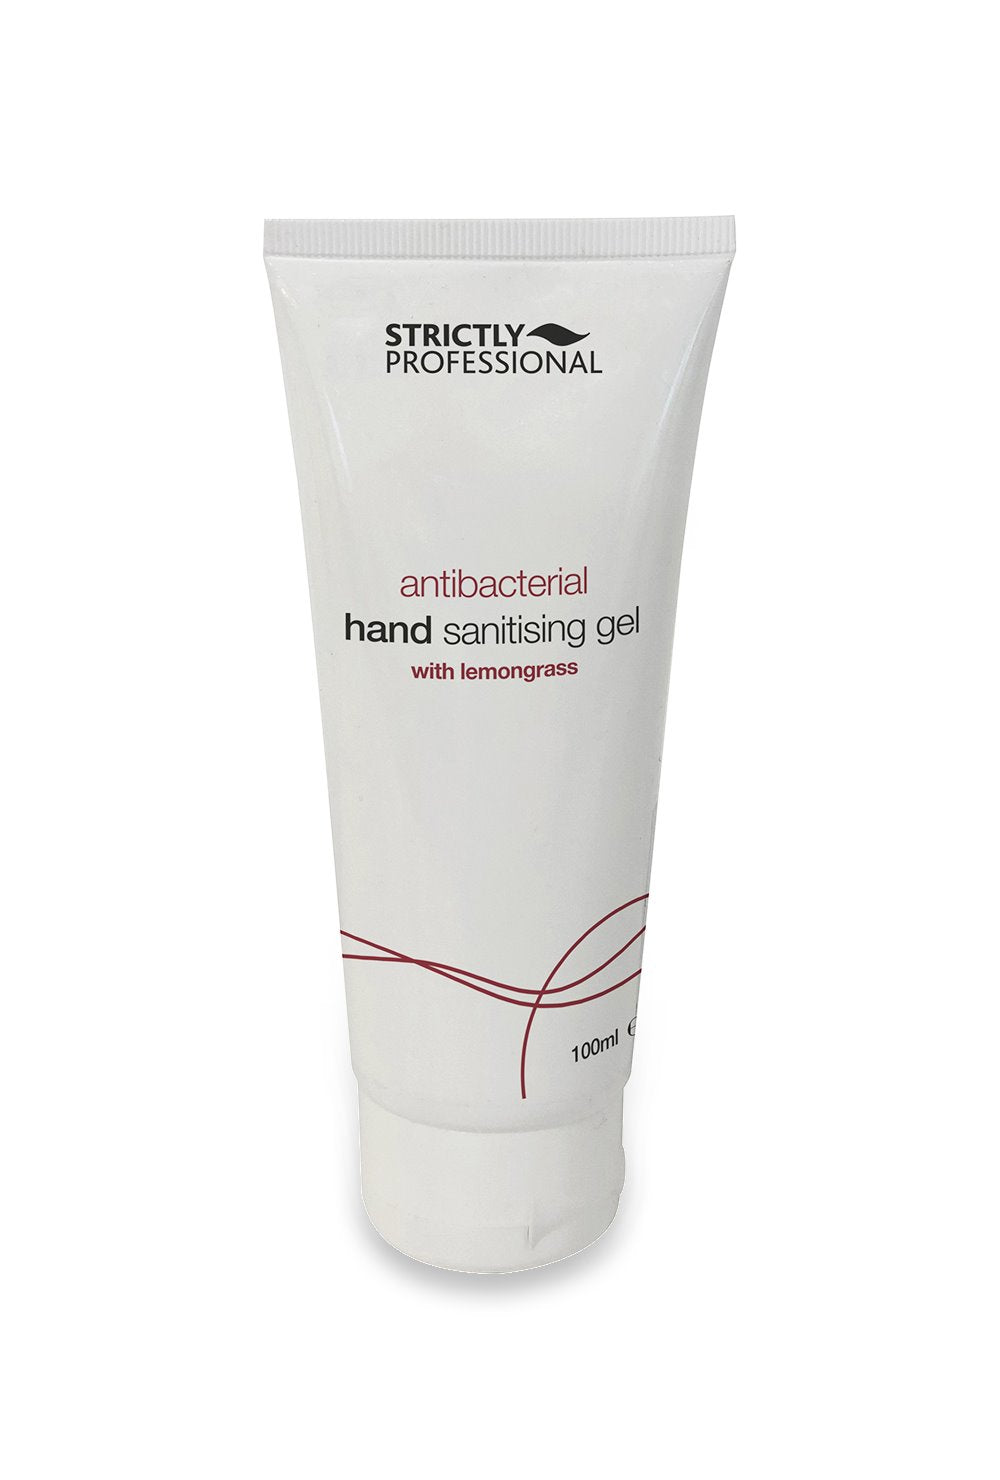 Strictly Professional Sanitising Gel with lemongrass 100ml - Ultimate Hair and Beauty